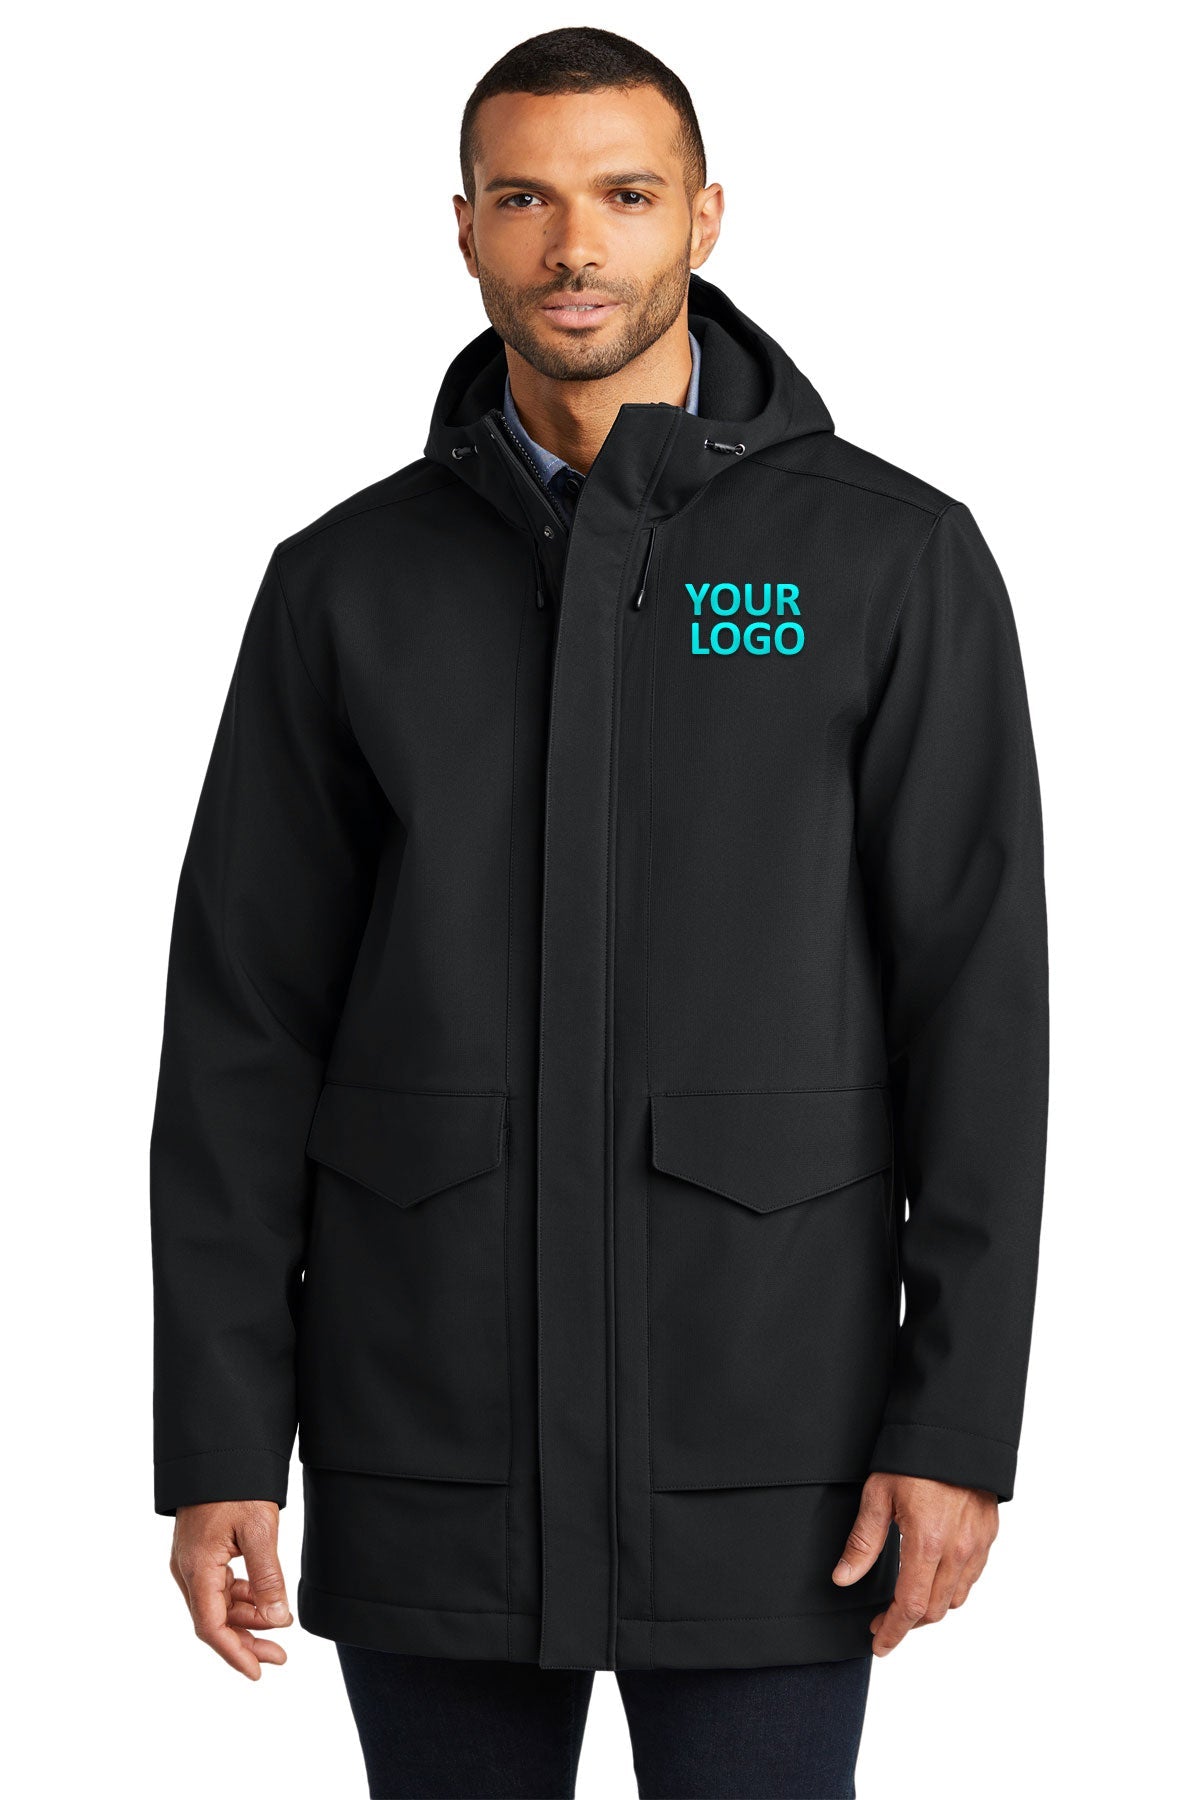 Port Authority Deep Black J919 business jackets with logo